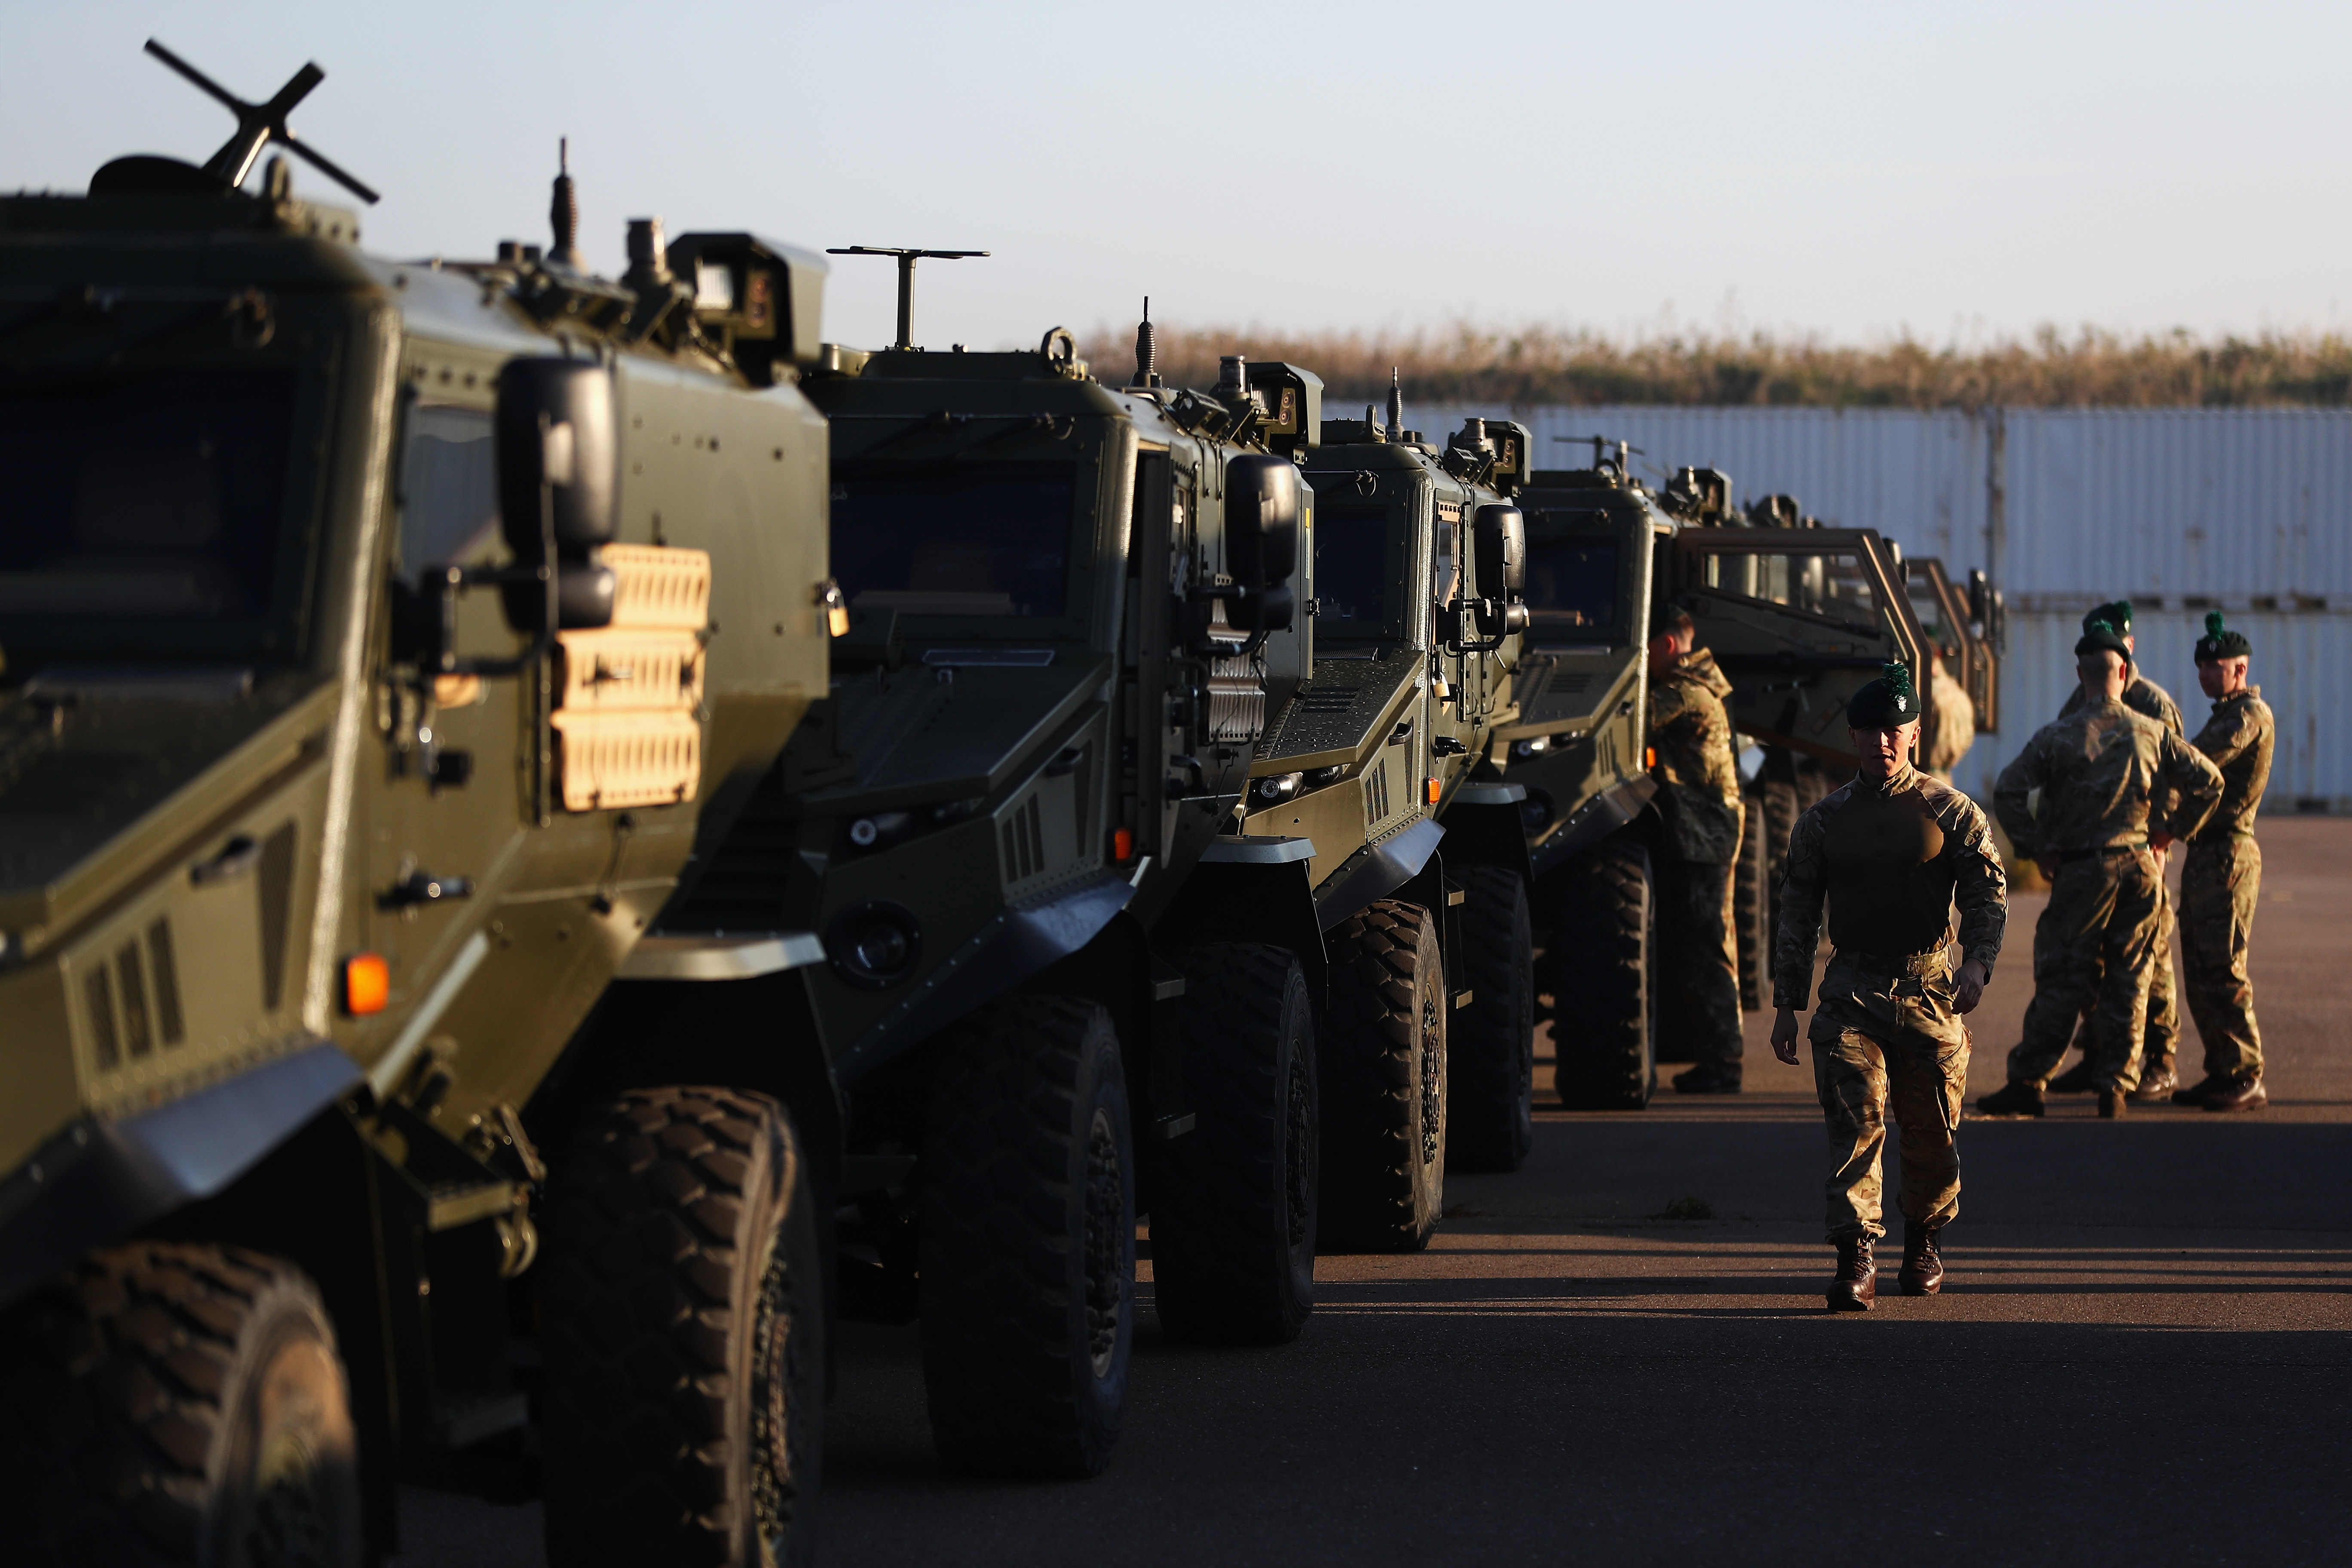 British and Irish soldiers with their military vehicles pause to check equipment and rest on Oct. 10, 2018, in Rotterdam, Netherlands. They were on their way to join other NATO forces for Operation Trident Juncture. Norway has long lobbied NATO partners to increase troop numbers as Russia has built up its military capacity in the region, especially the Kola Peninsula inside the Arctic Circle. (Dean Mouhtaropoulos/Getty Images)